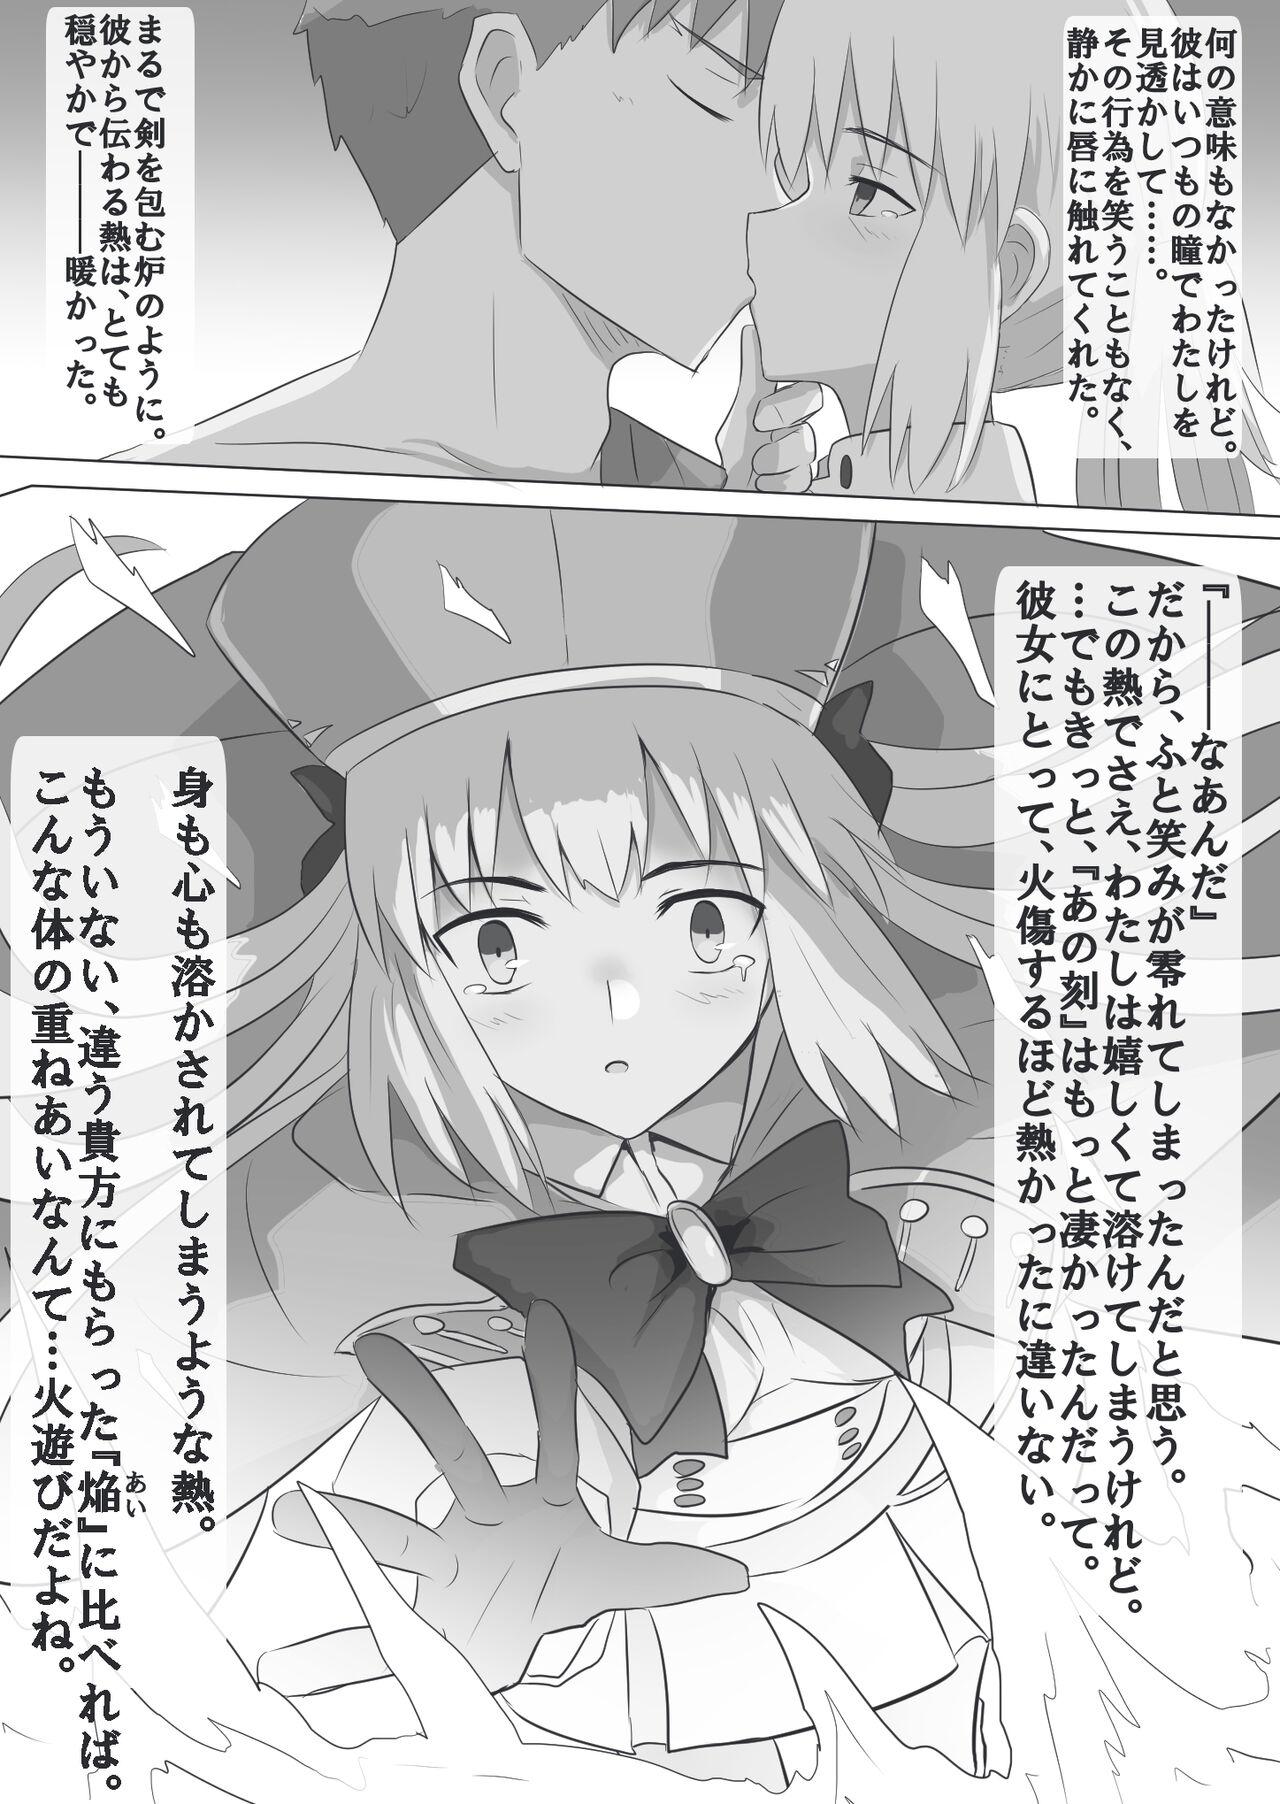 Young Old MuraCas 7 - Fate grand order Body - Page 4